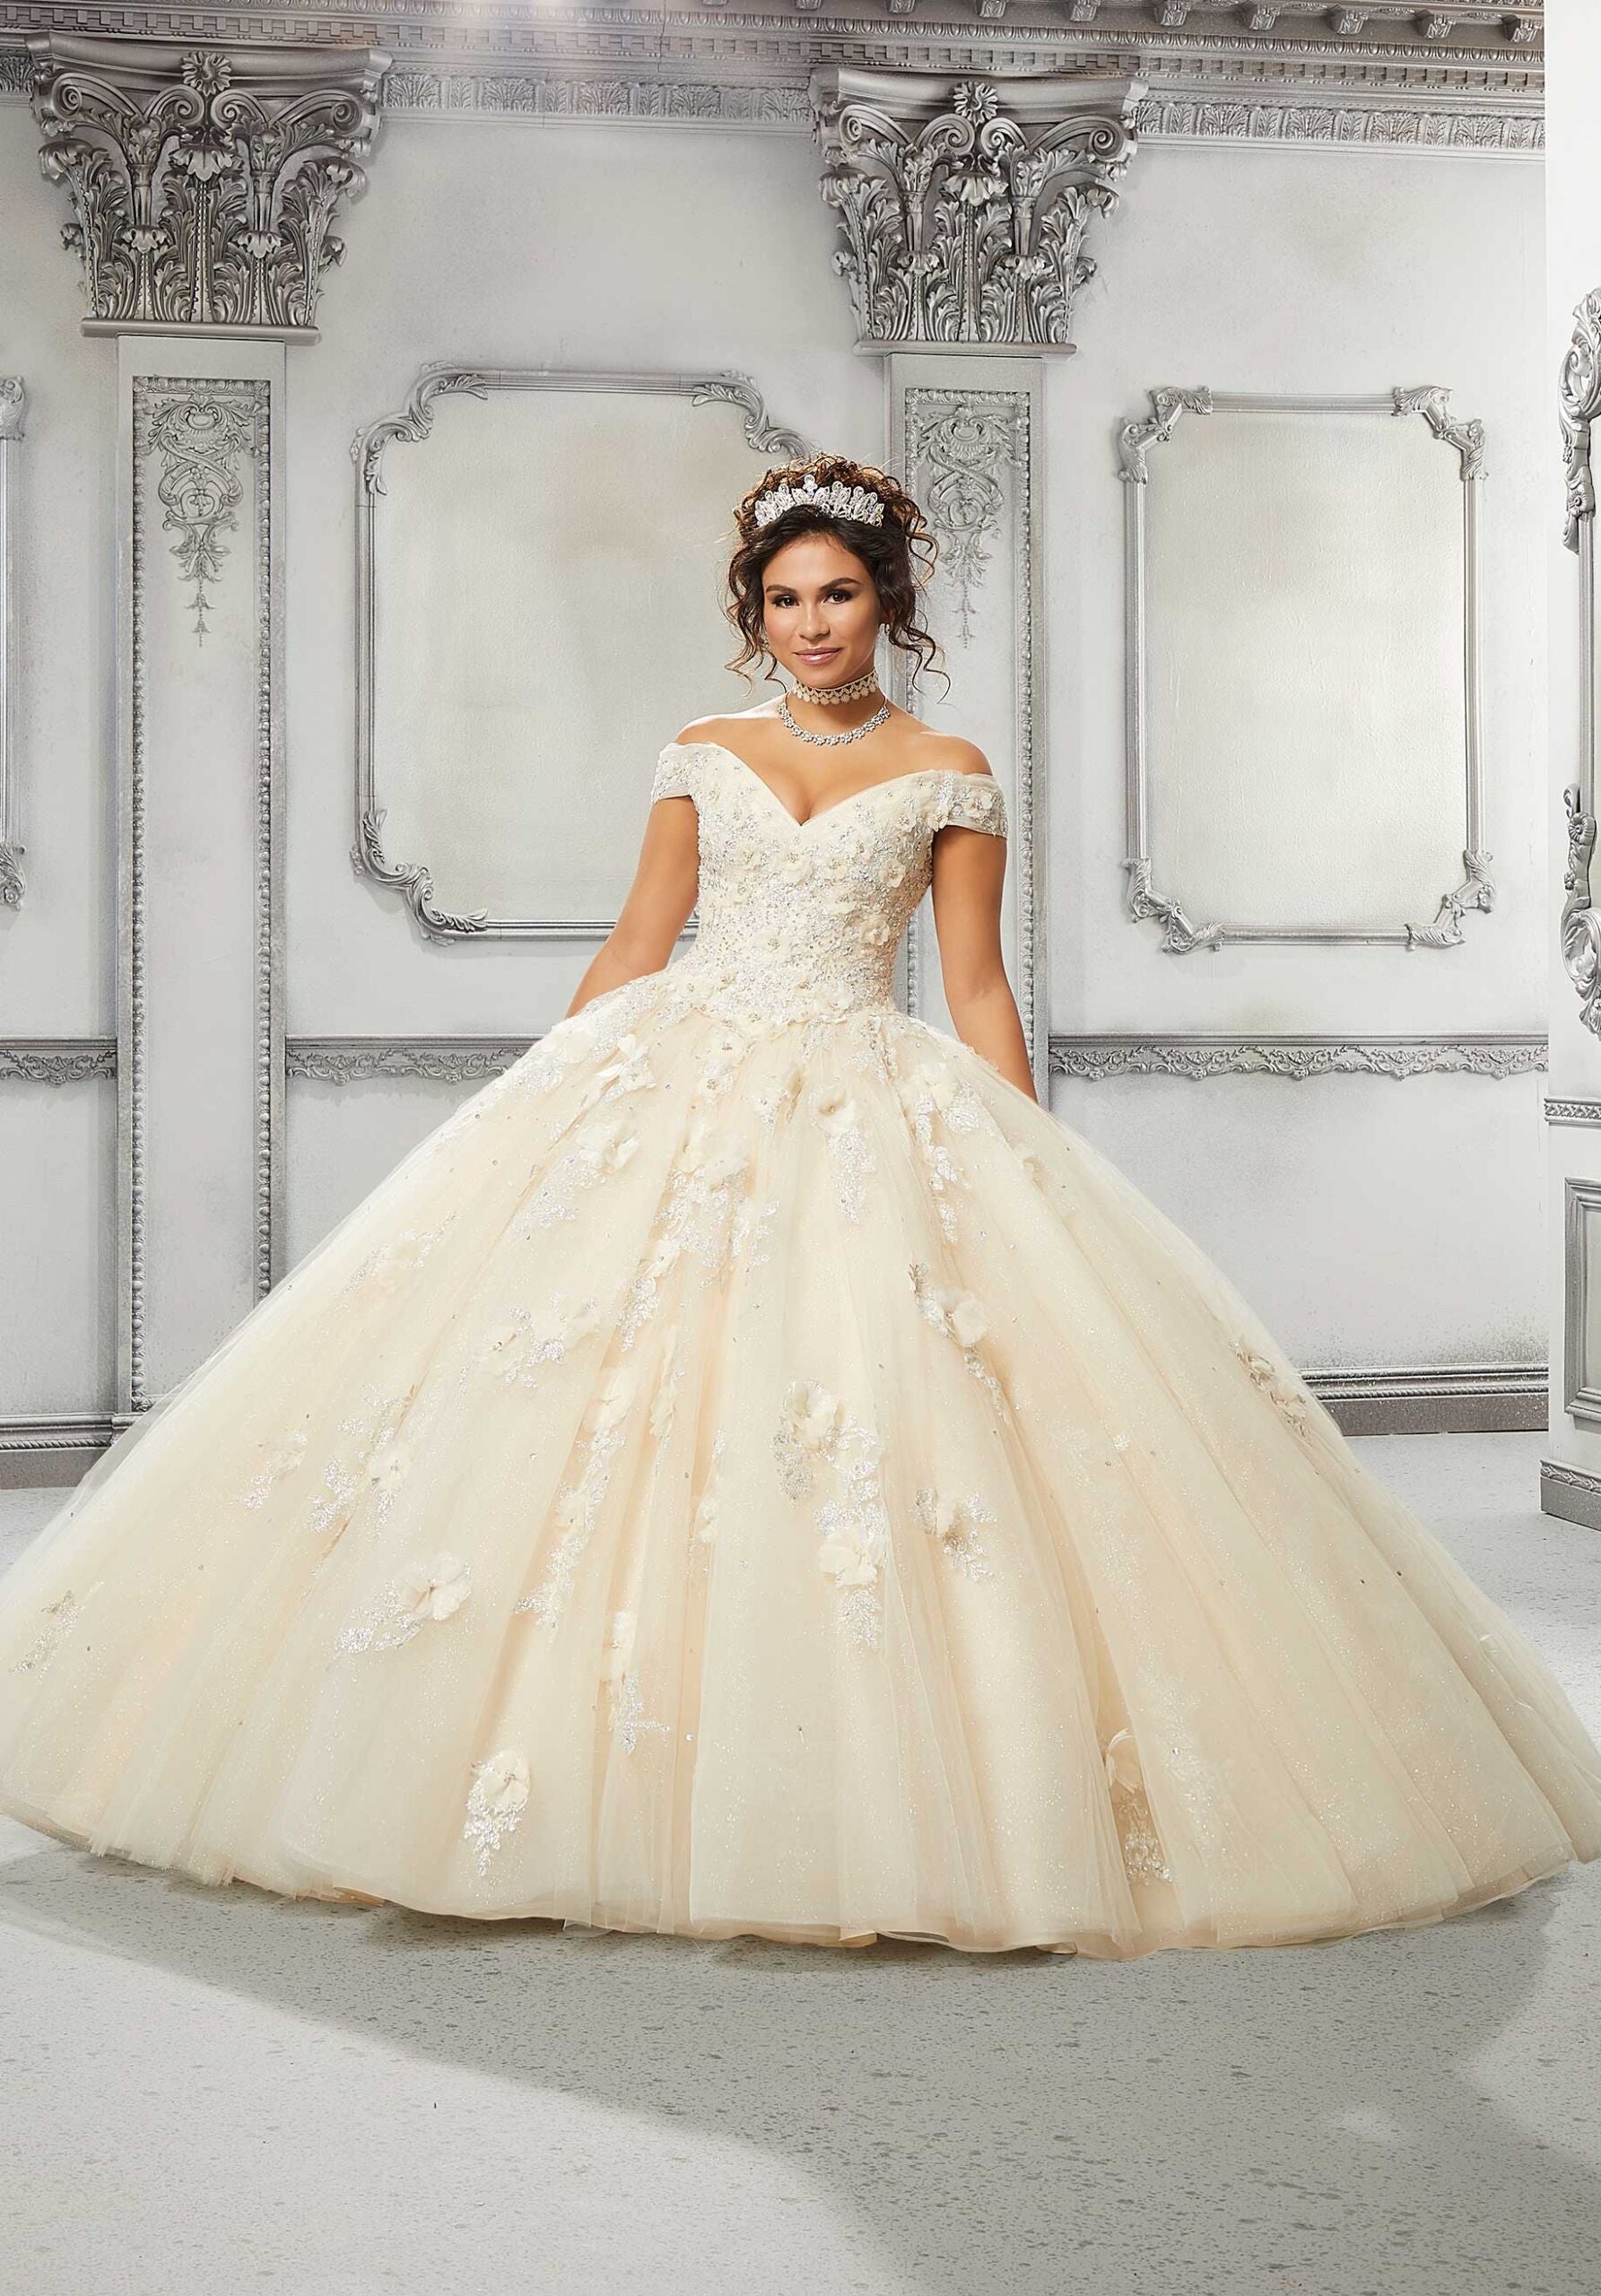 Crystal Beaded Three-Dimensional Floral Quinceañera Dress